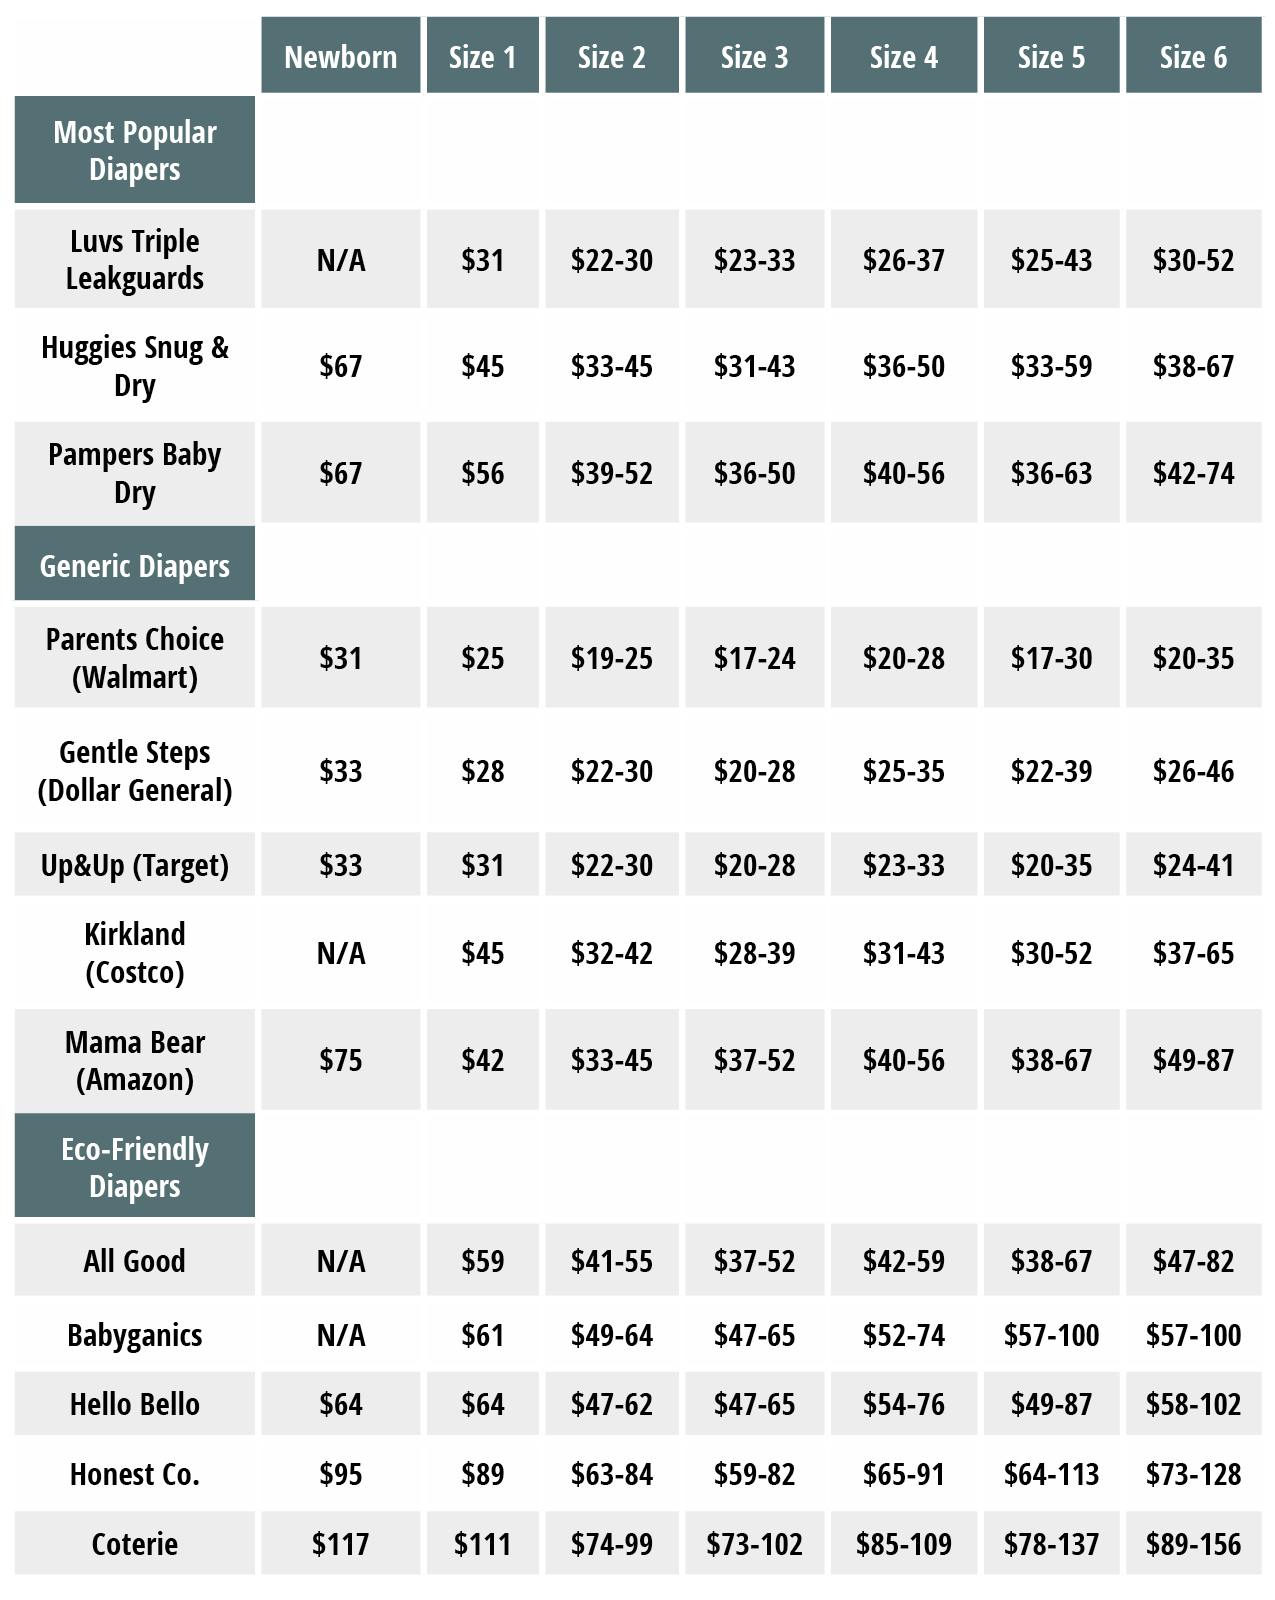 popular diaper brands and cost per month for diapers by size